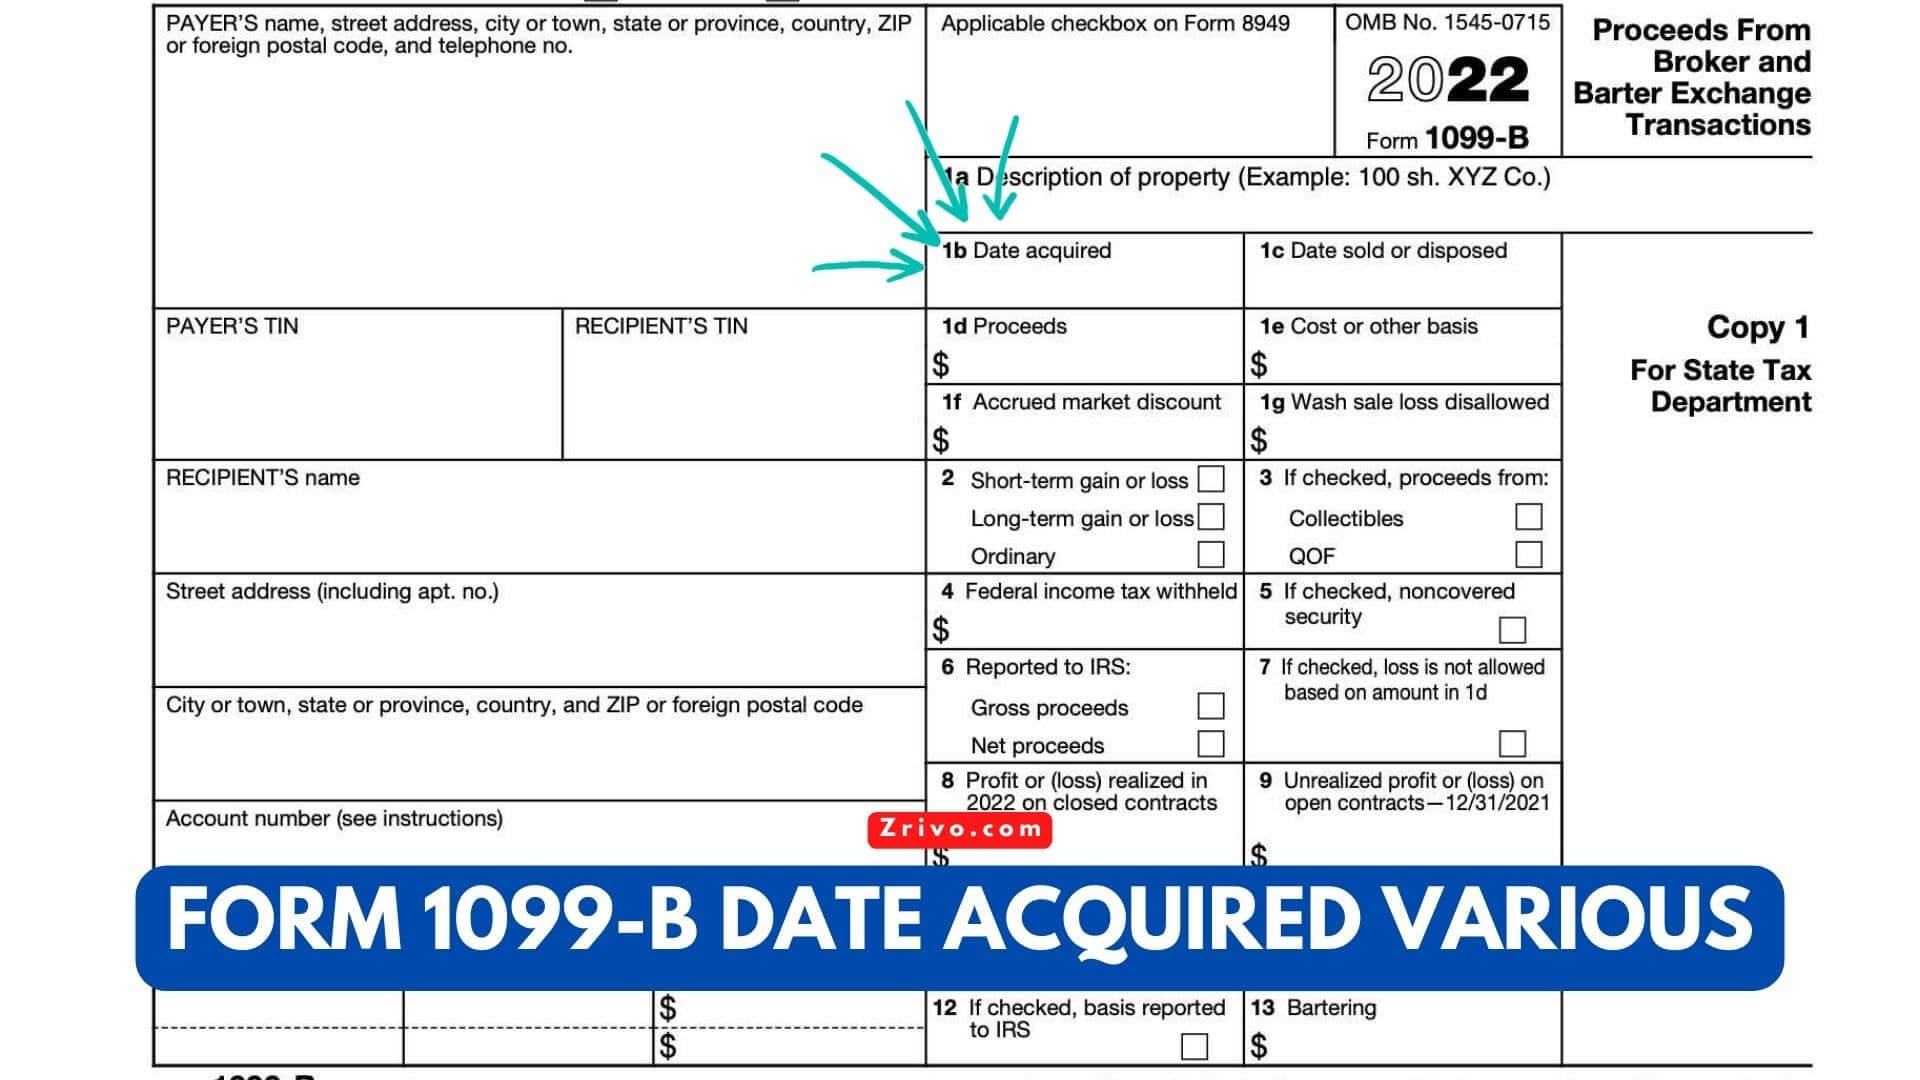 Form 1099-B Date Acquired Various